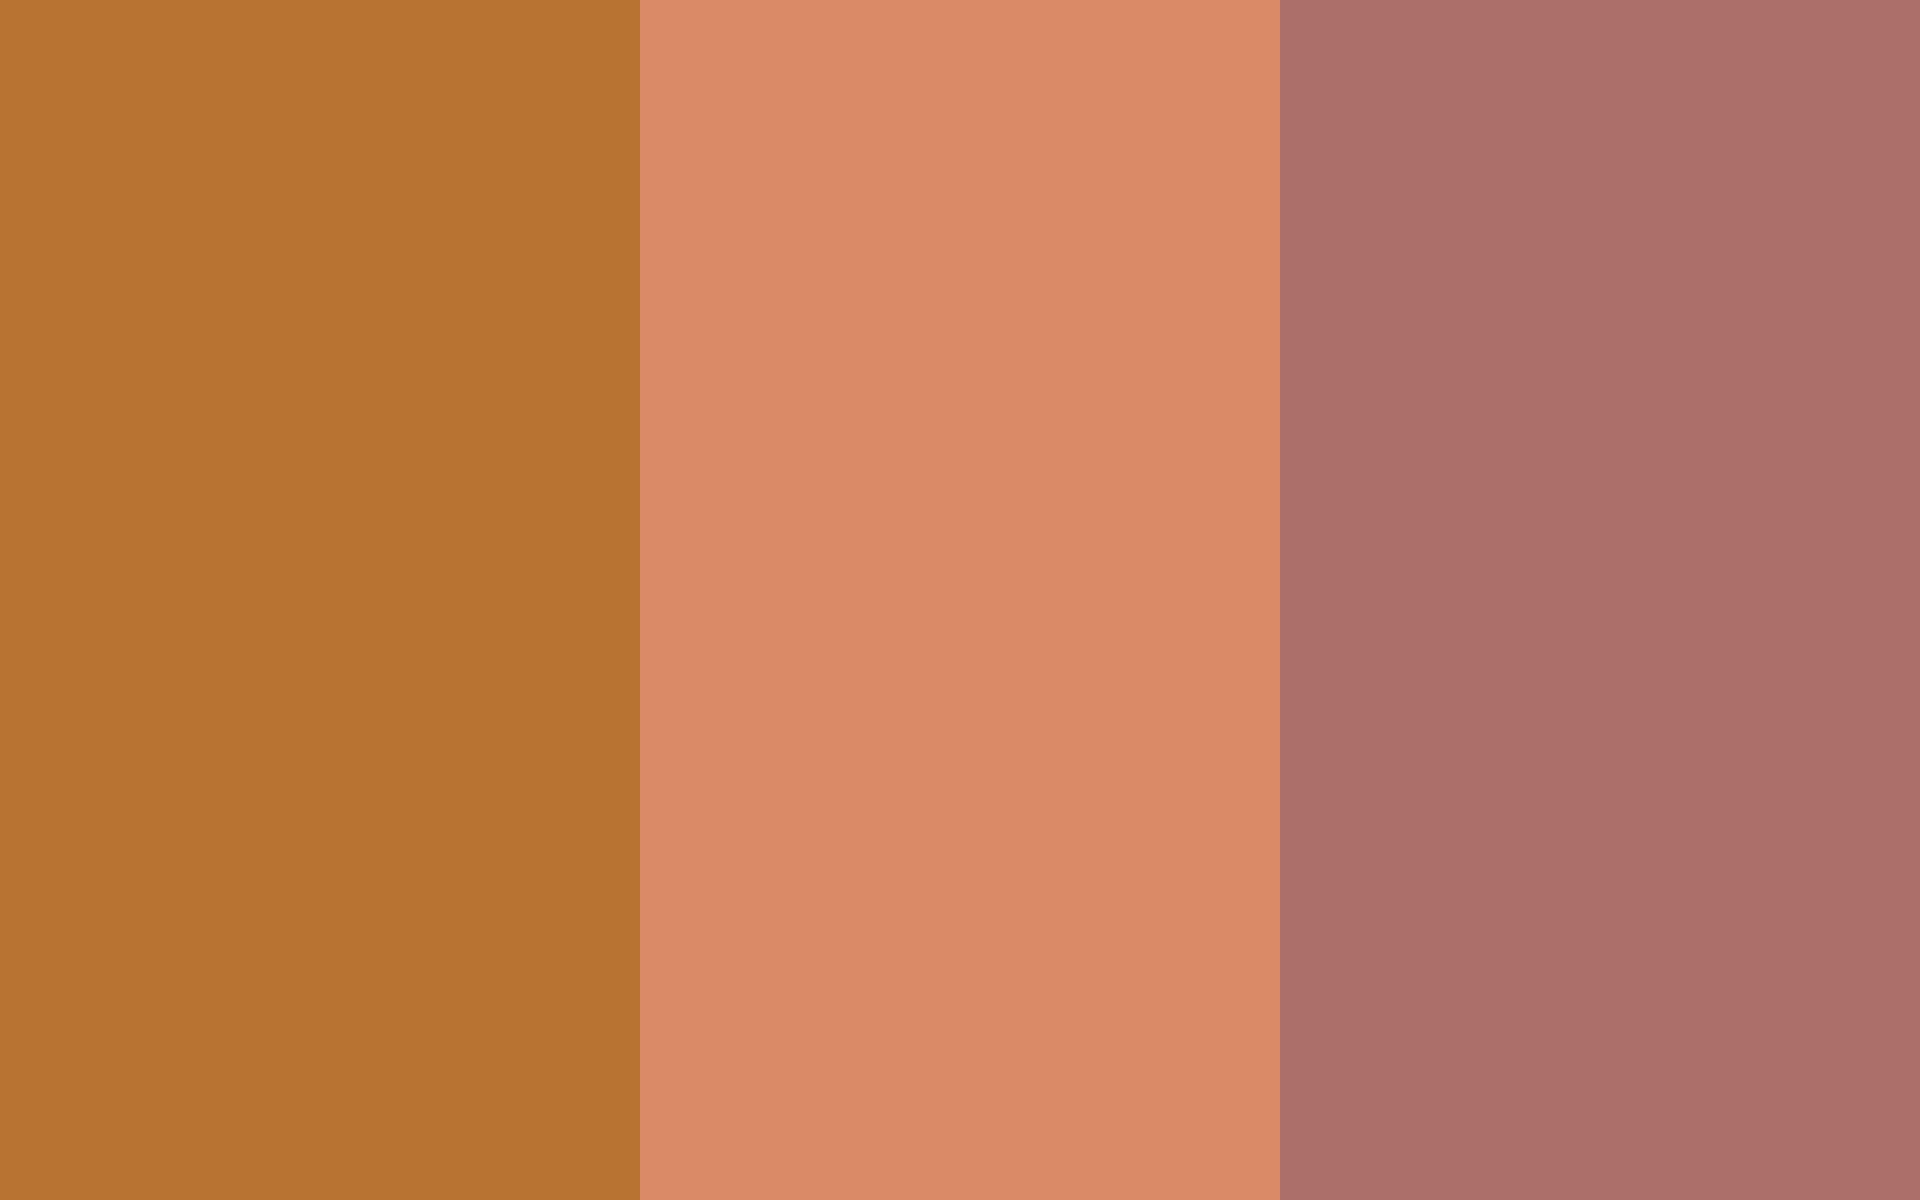 Copper Copper Crayola and Copper Penny solid three color background